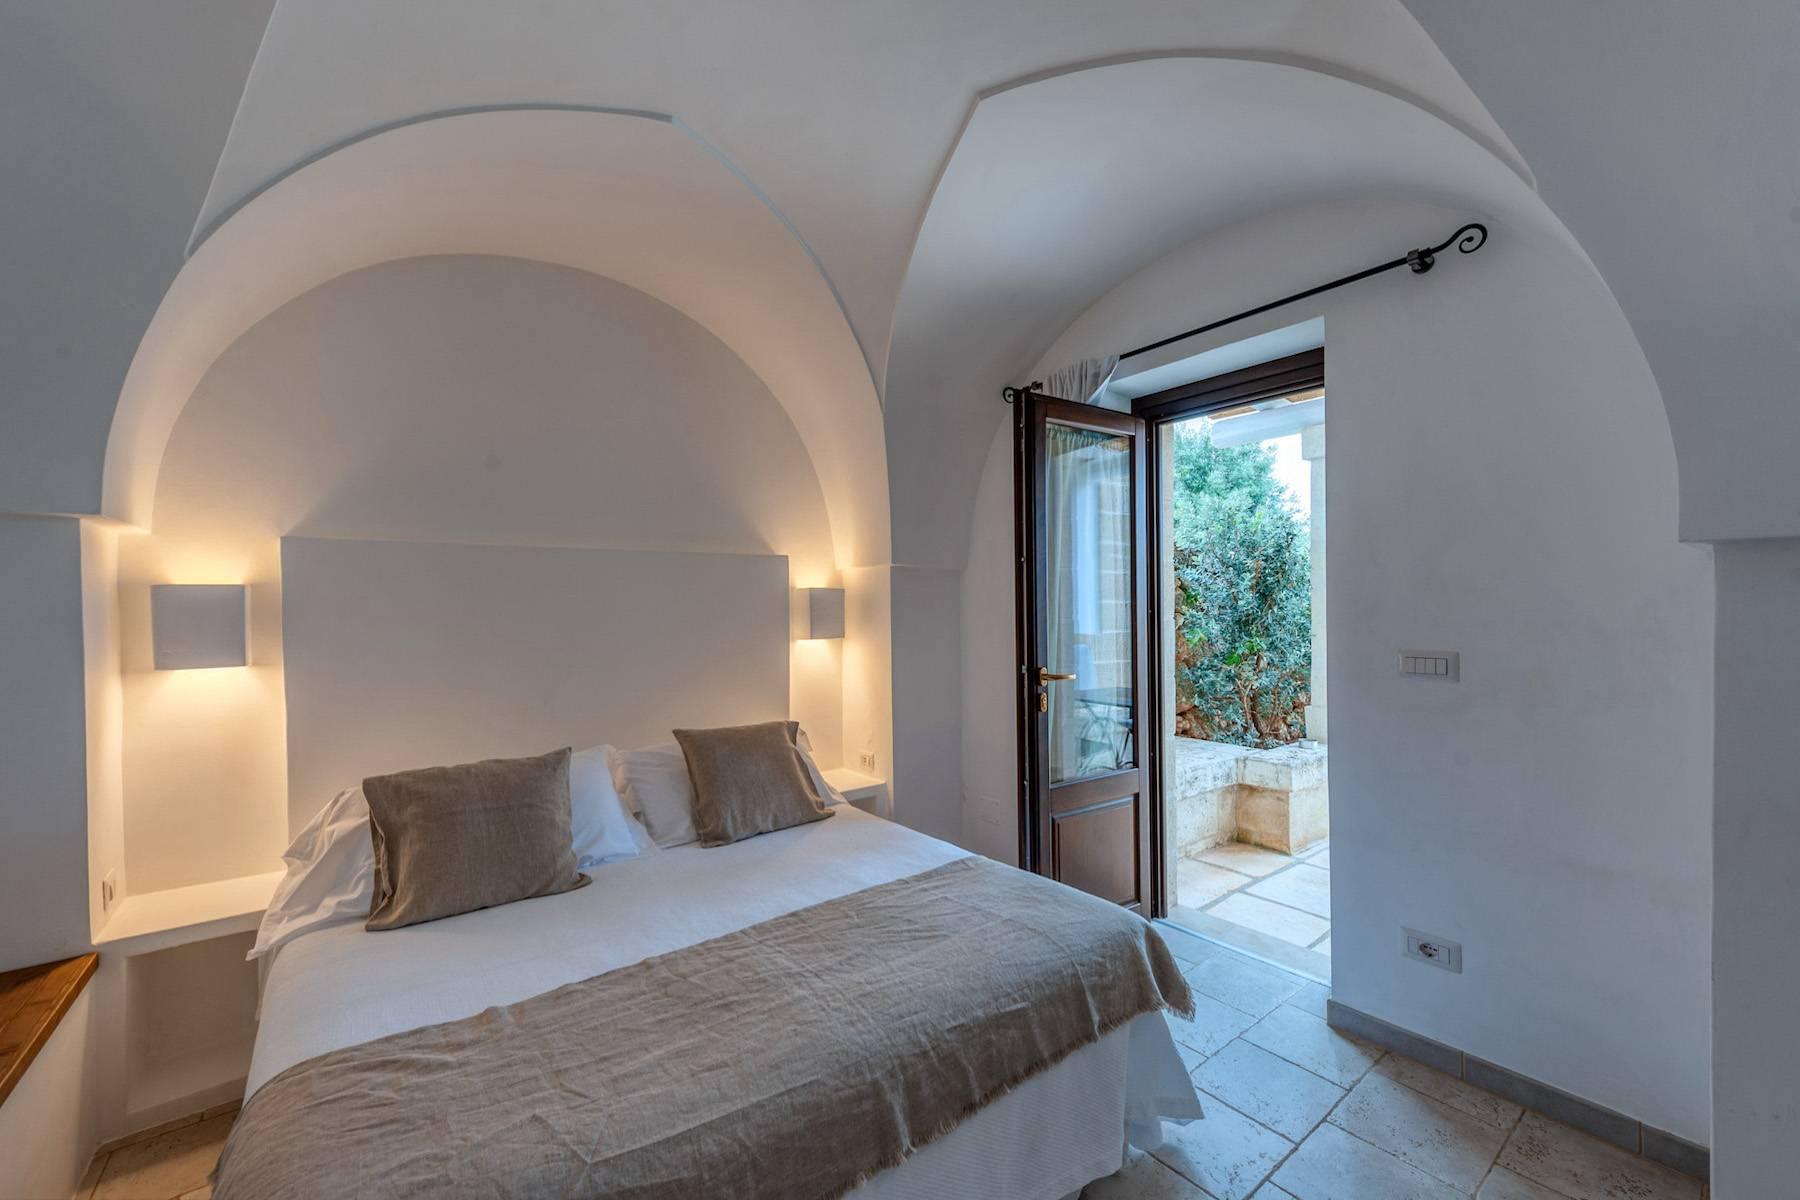 Charming 18th century Masseria surrounded by centuries-old olive trees - 23